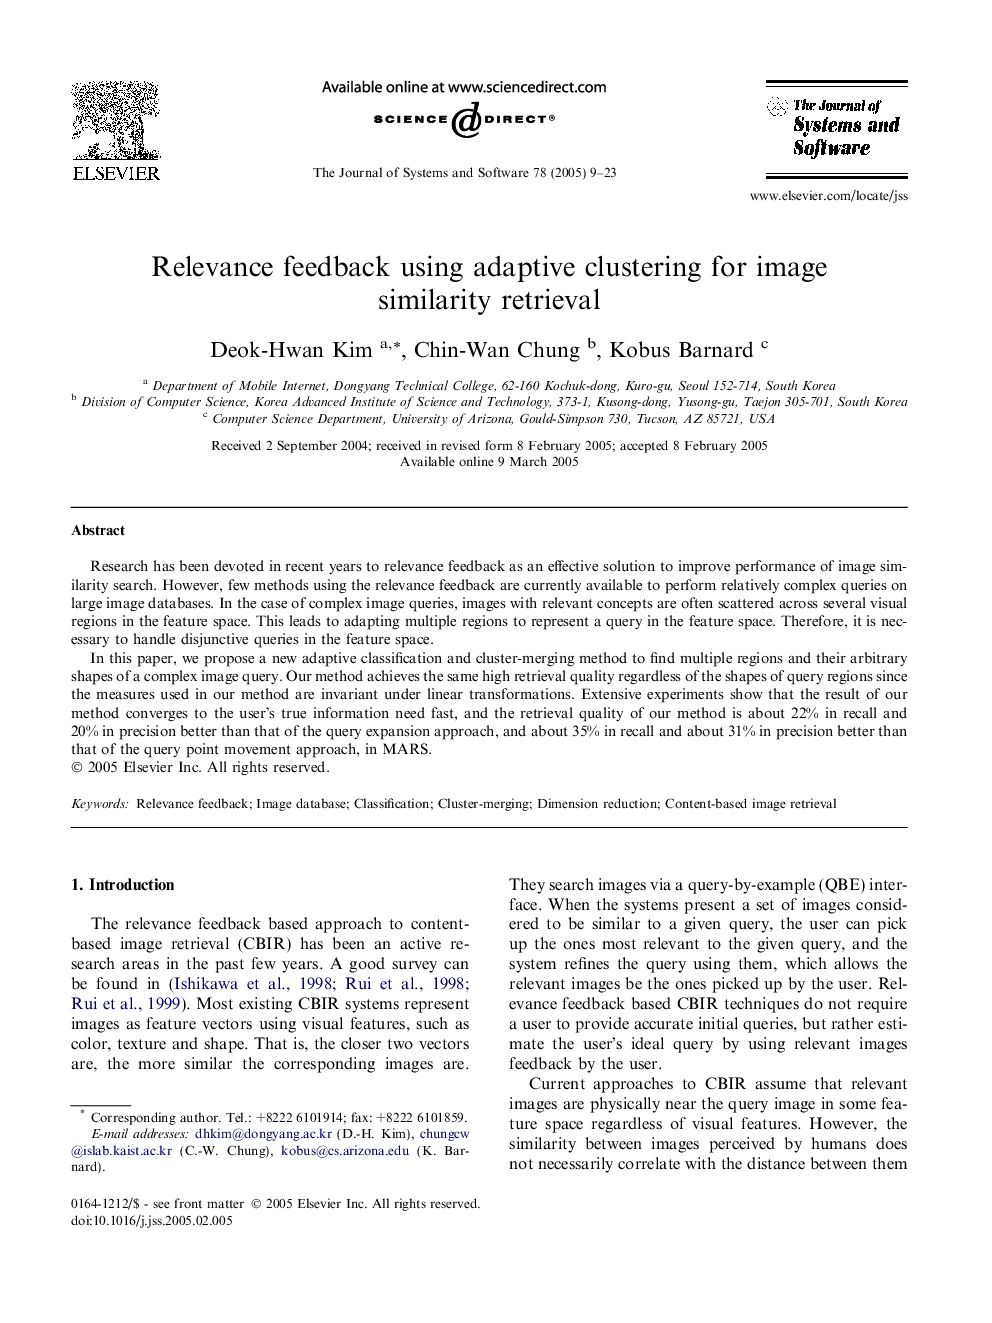 Relevance feedback using adaptive clustering for image similarity retrieval